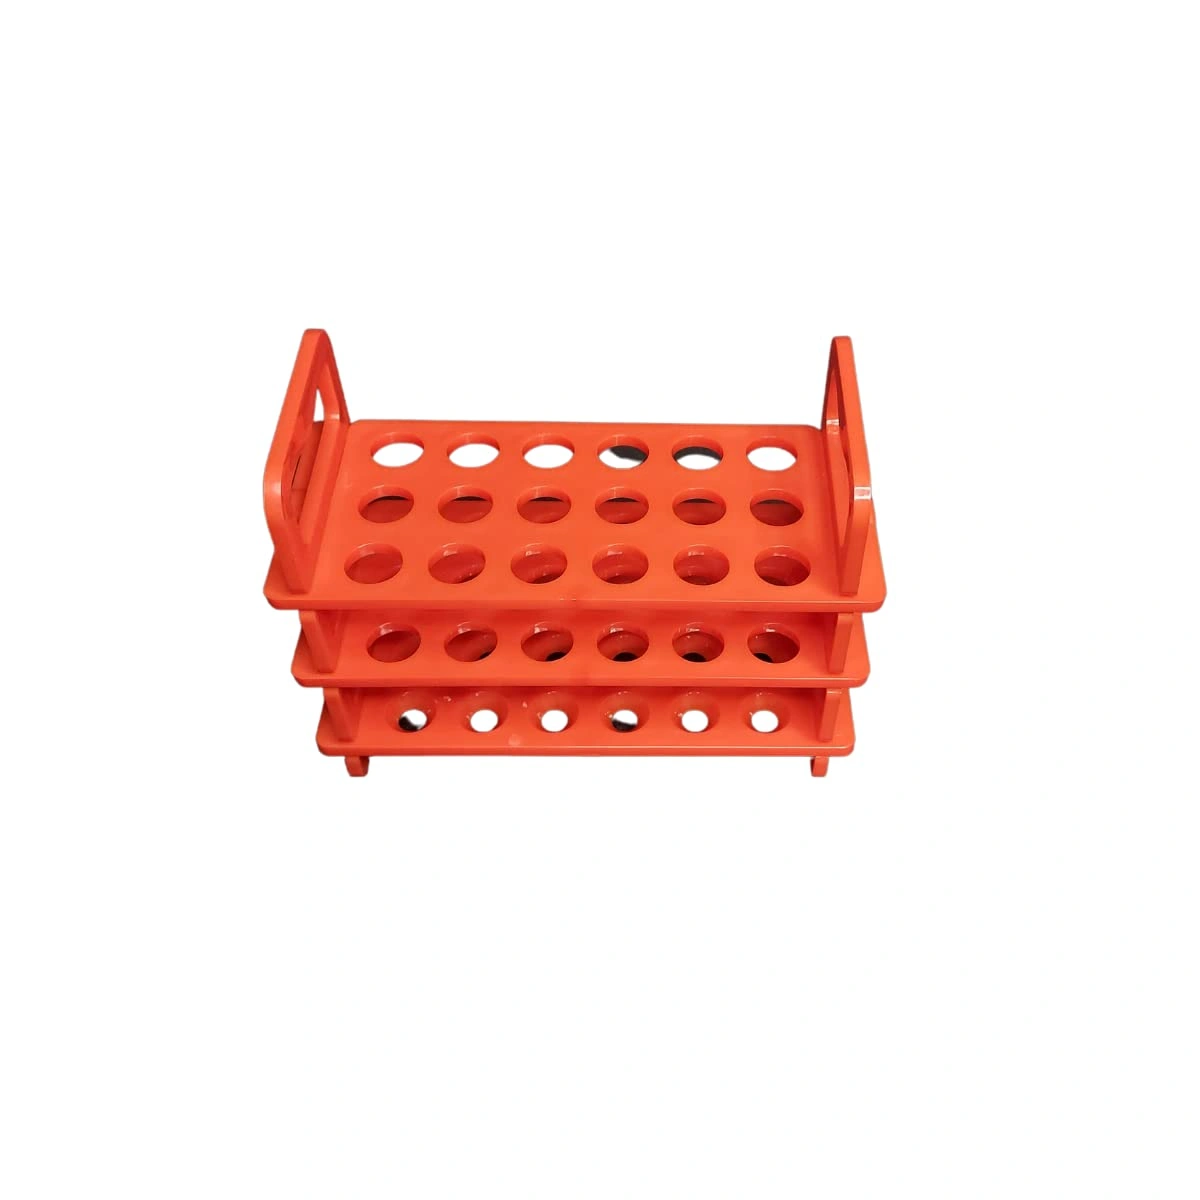 Test tube stand 3 TIER: 13mm × 18 Holes (Pack of 1)-2